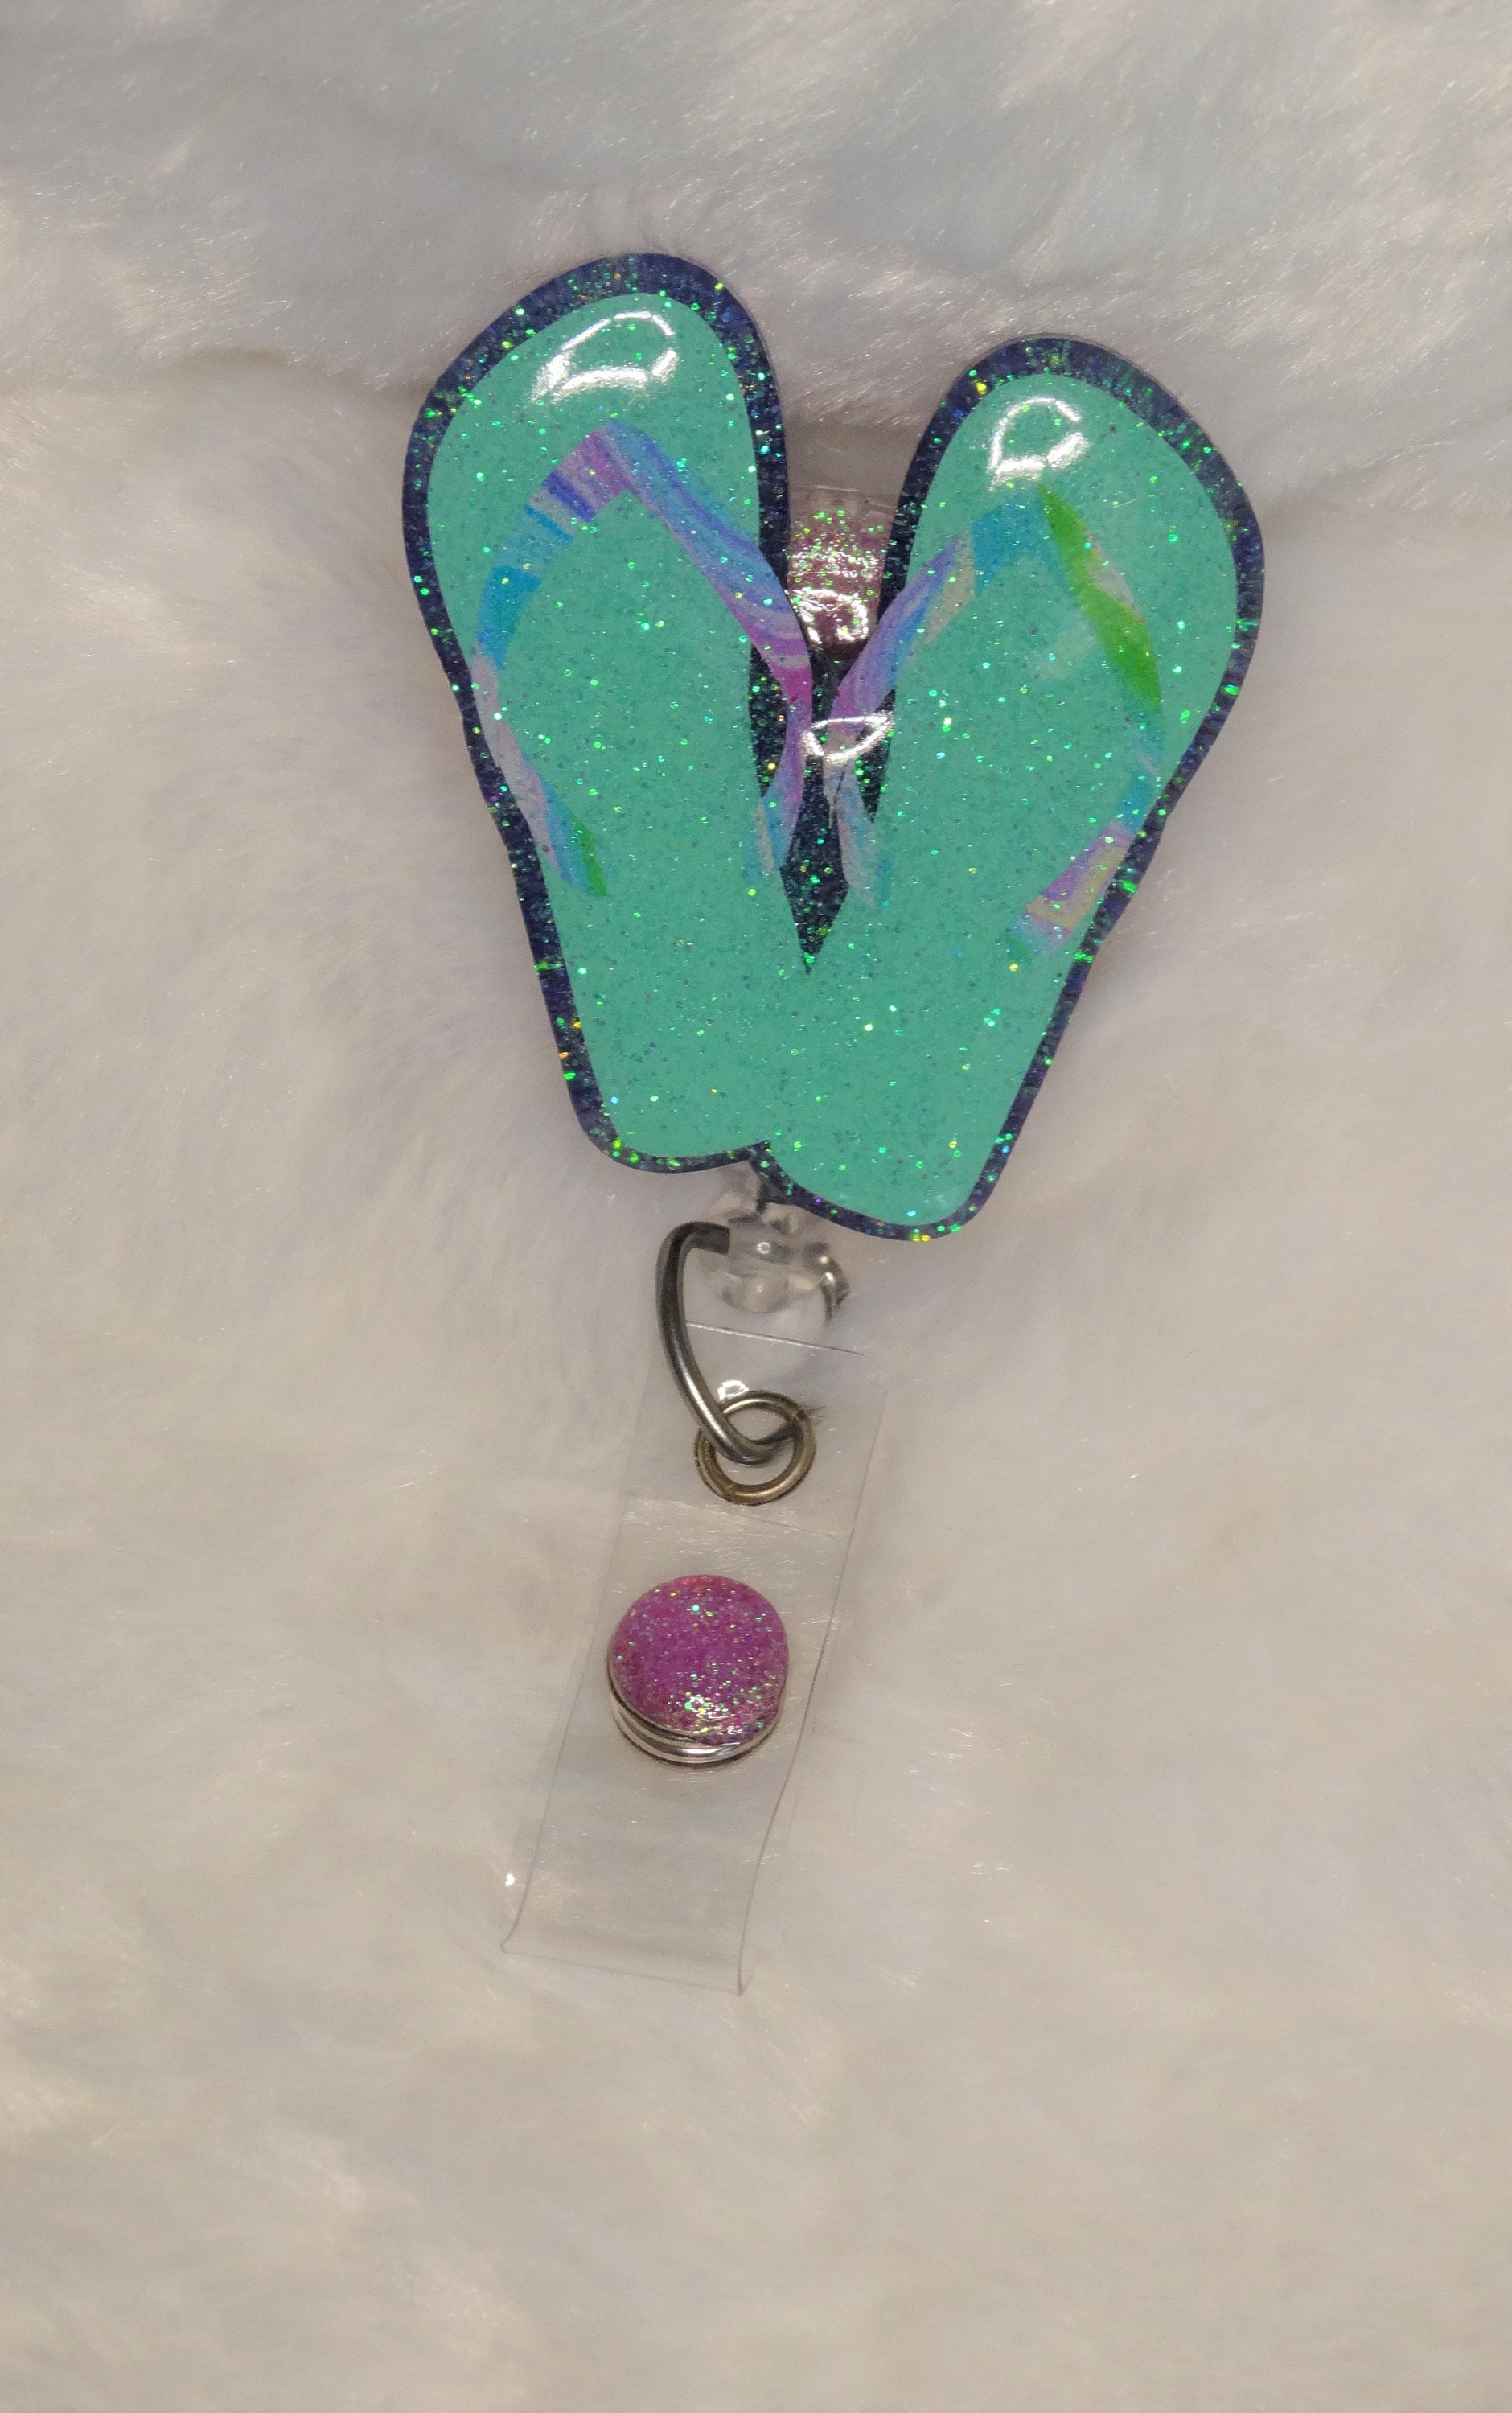 Flip Flop Badge Reel Teal, Pink and Multi Colors Gives This Badge